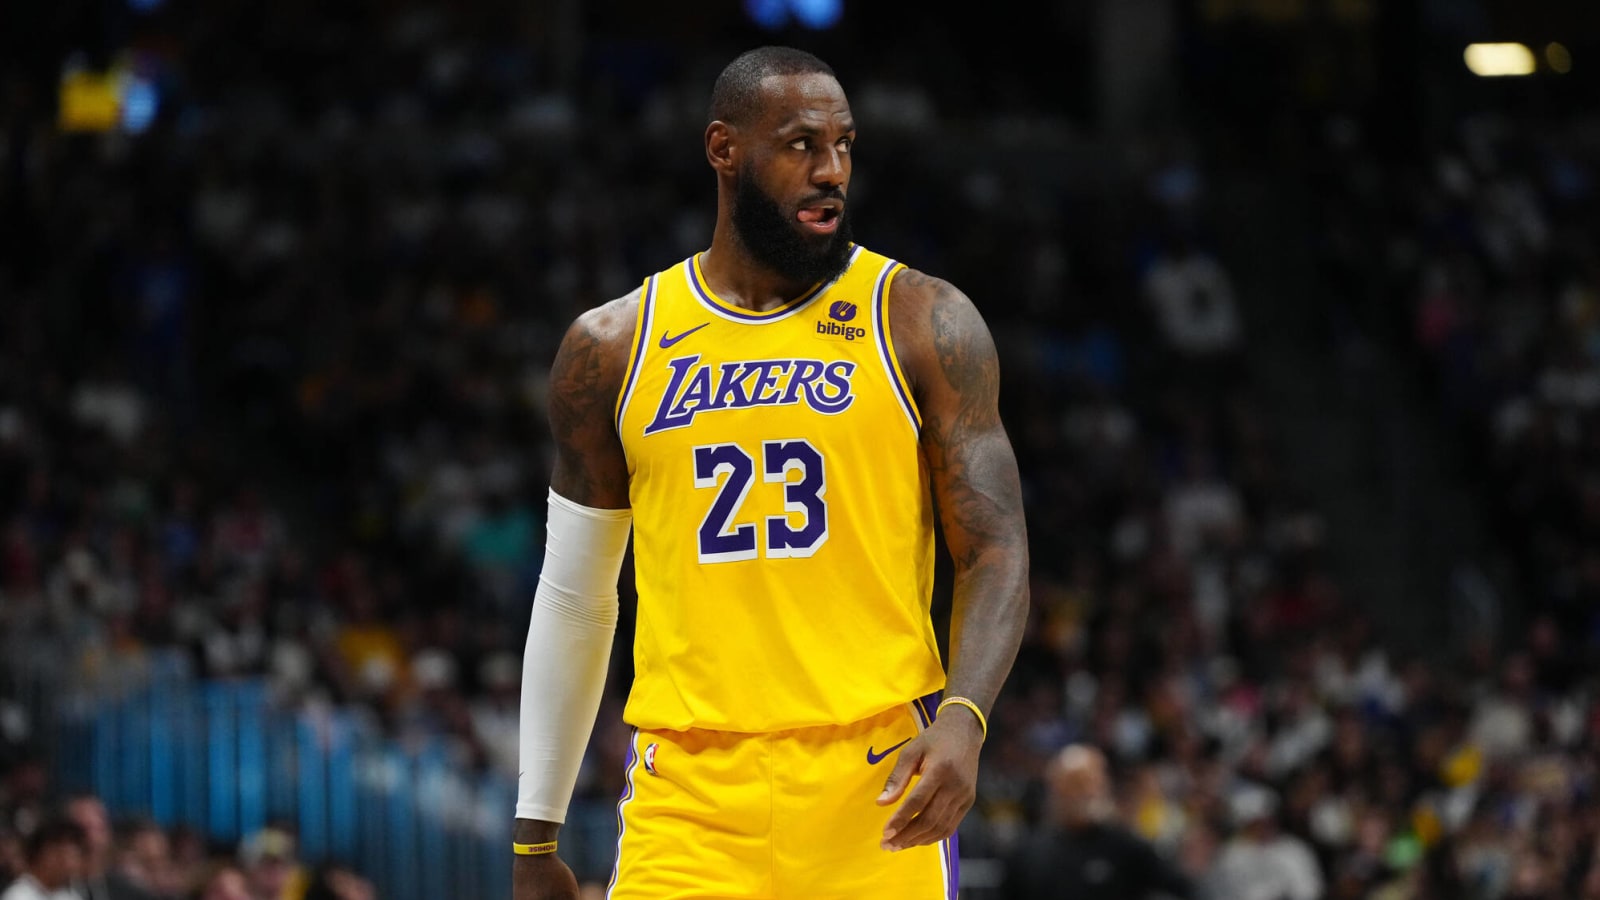 LeBron James doesn't have 'clutch gene,' claims Skip Bayless in wild take after Lakers lose to Nuggets